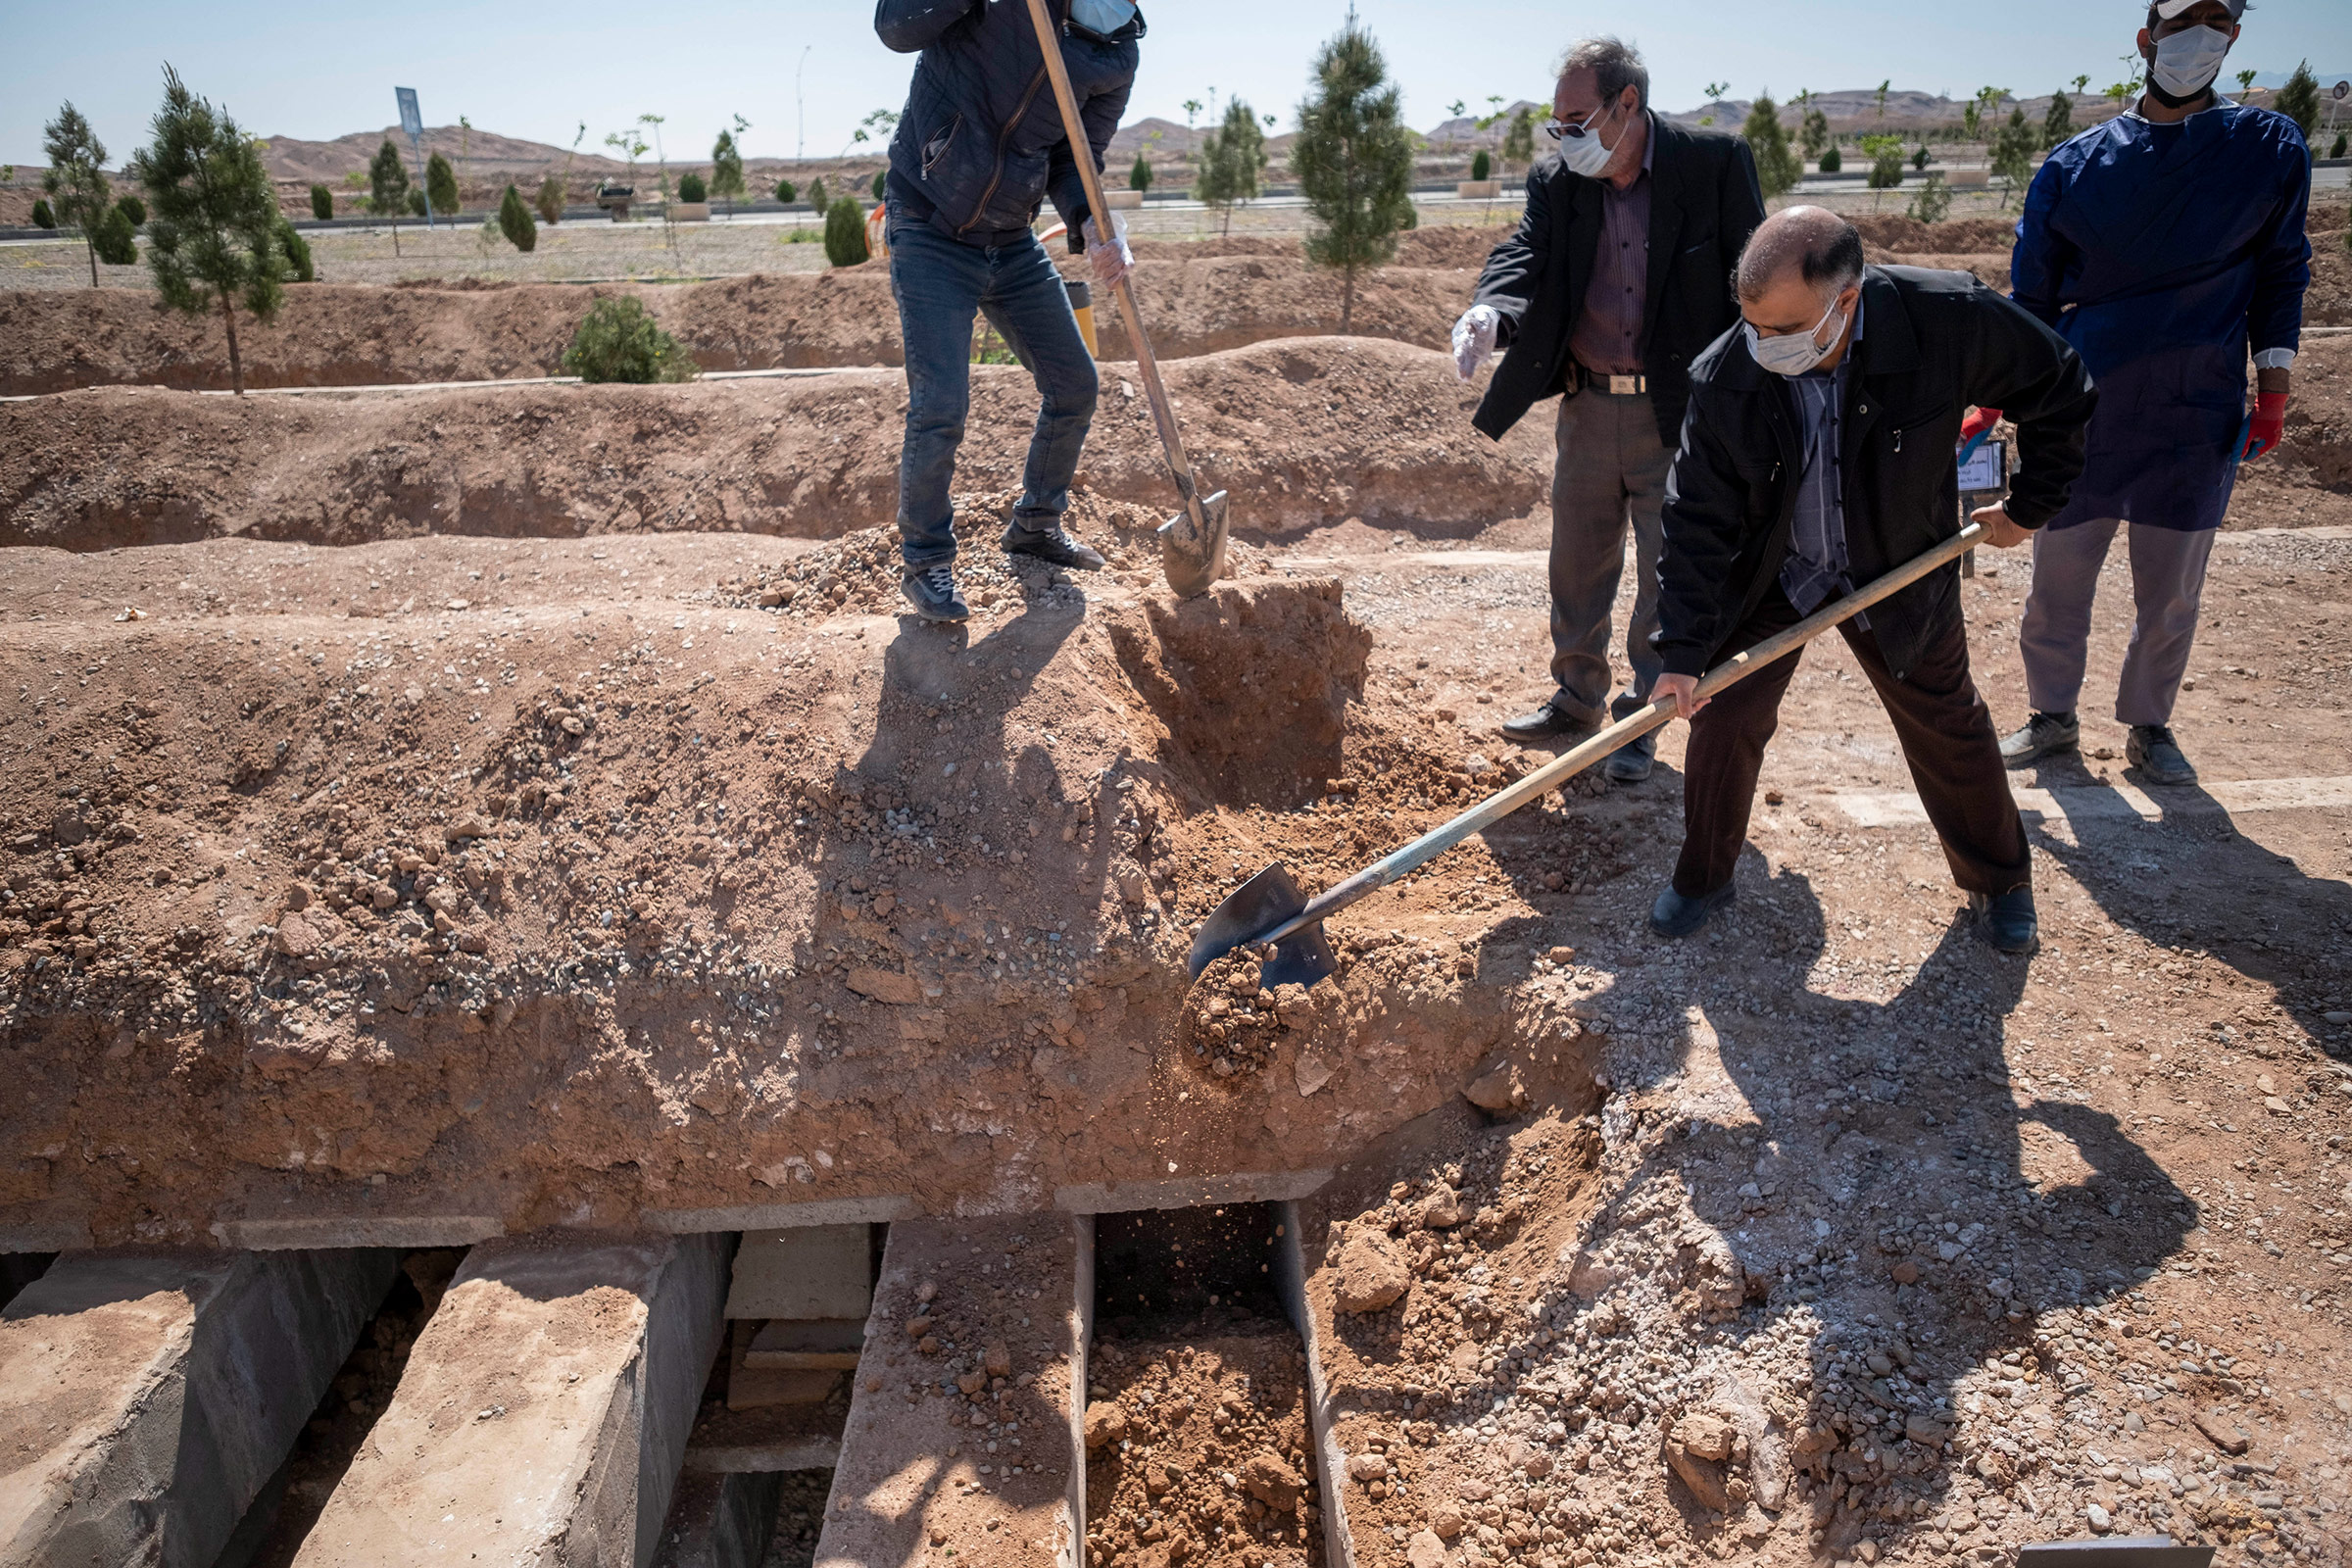 Relatives of a Covid-19 victim cover the body with soil at Benhesht-e-Masoumeh cemetery in Qom, Iran, on April 4. 